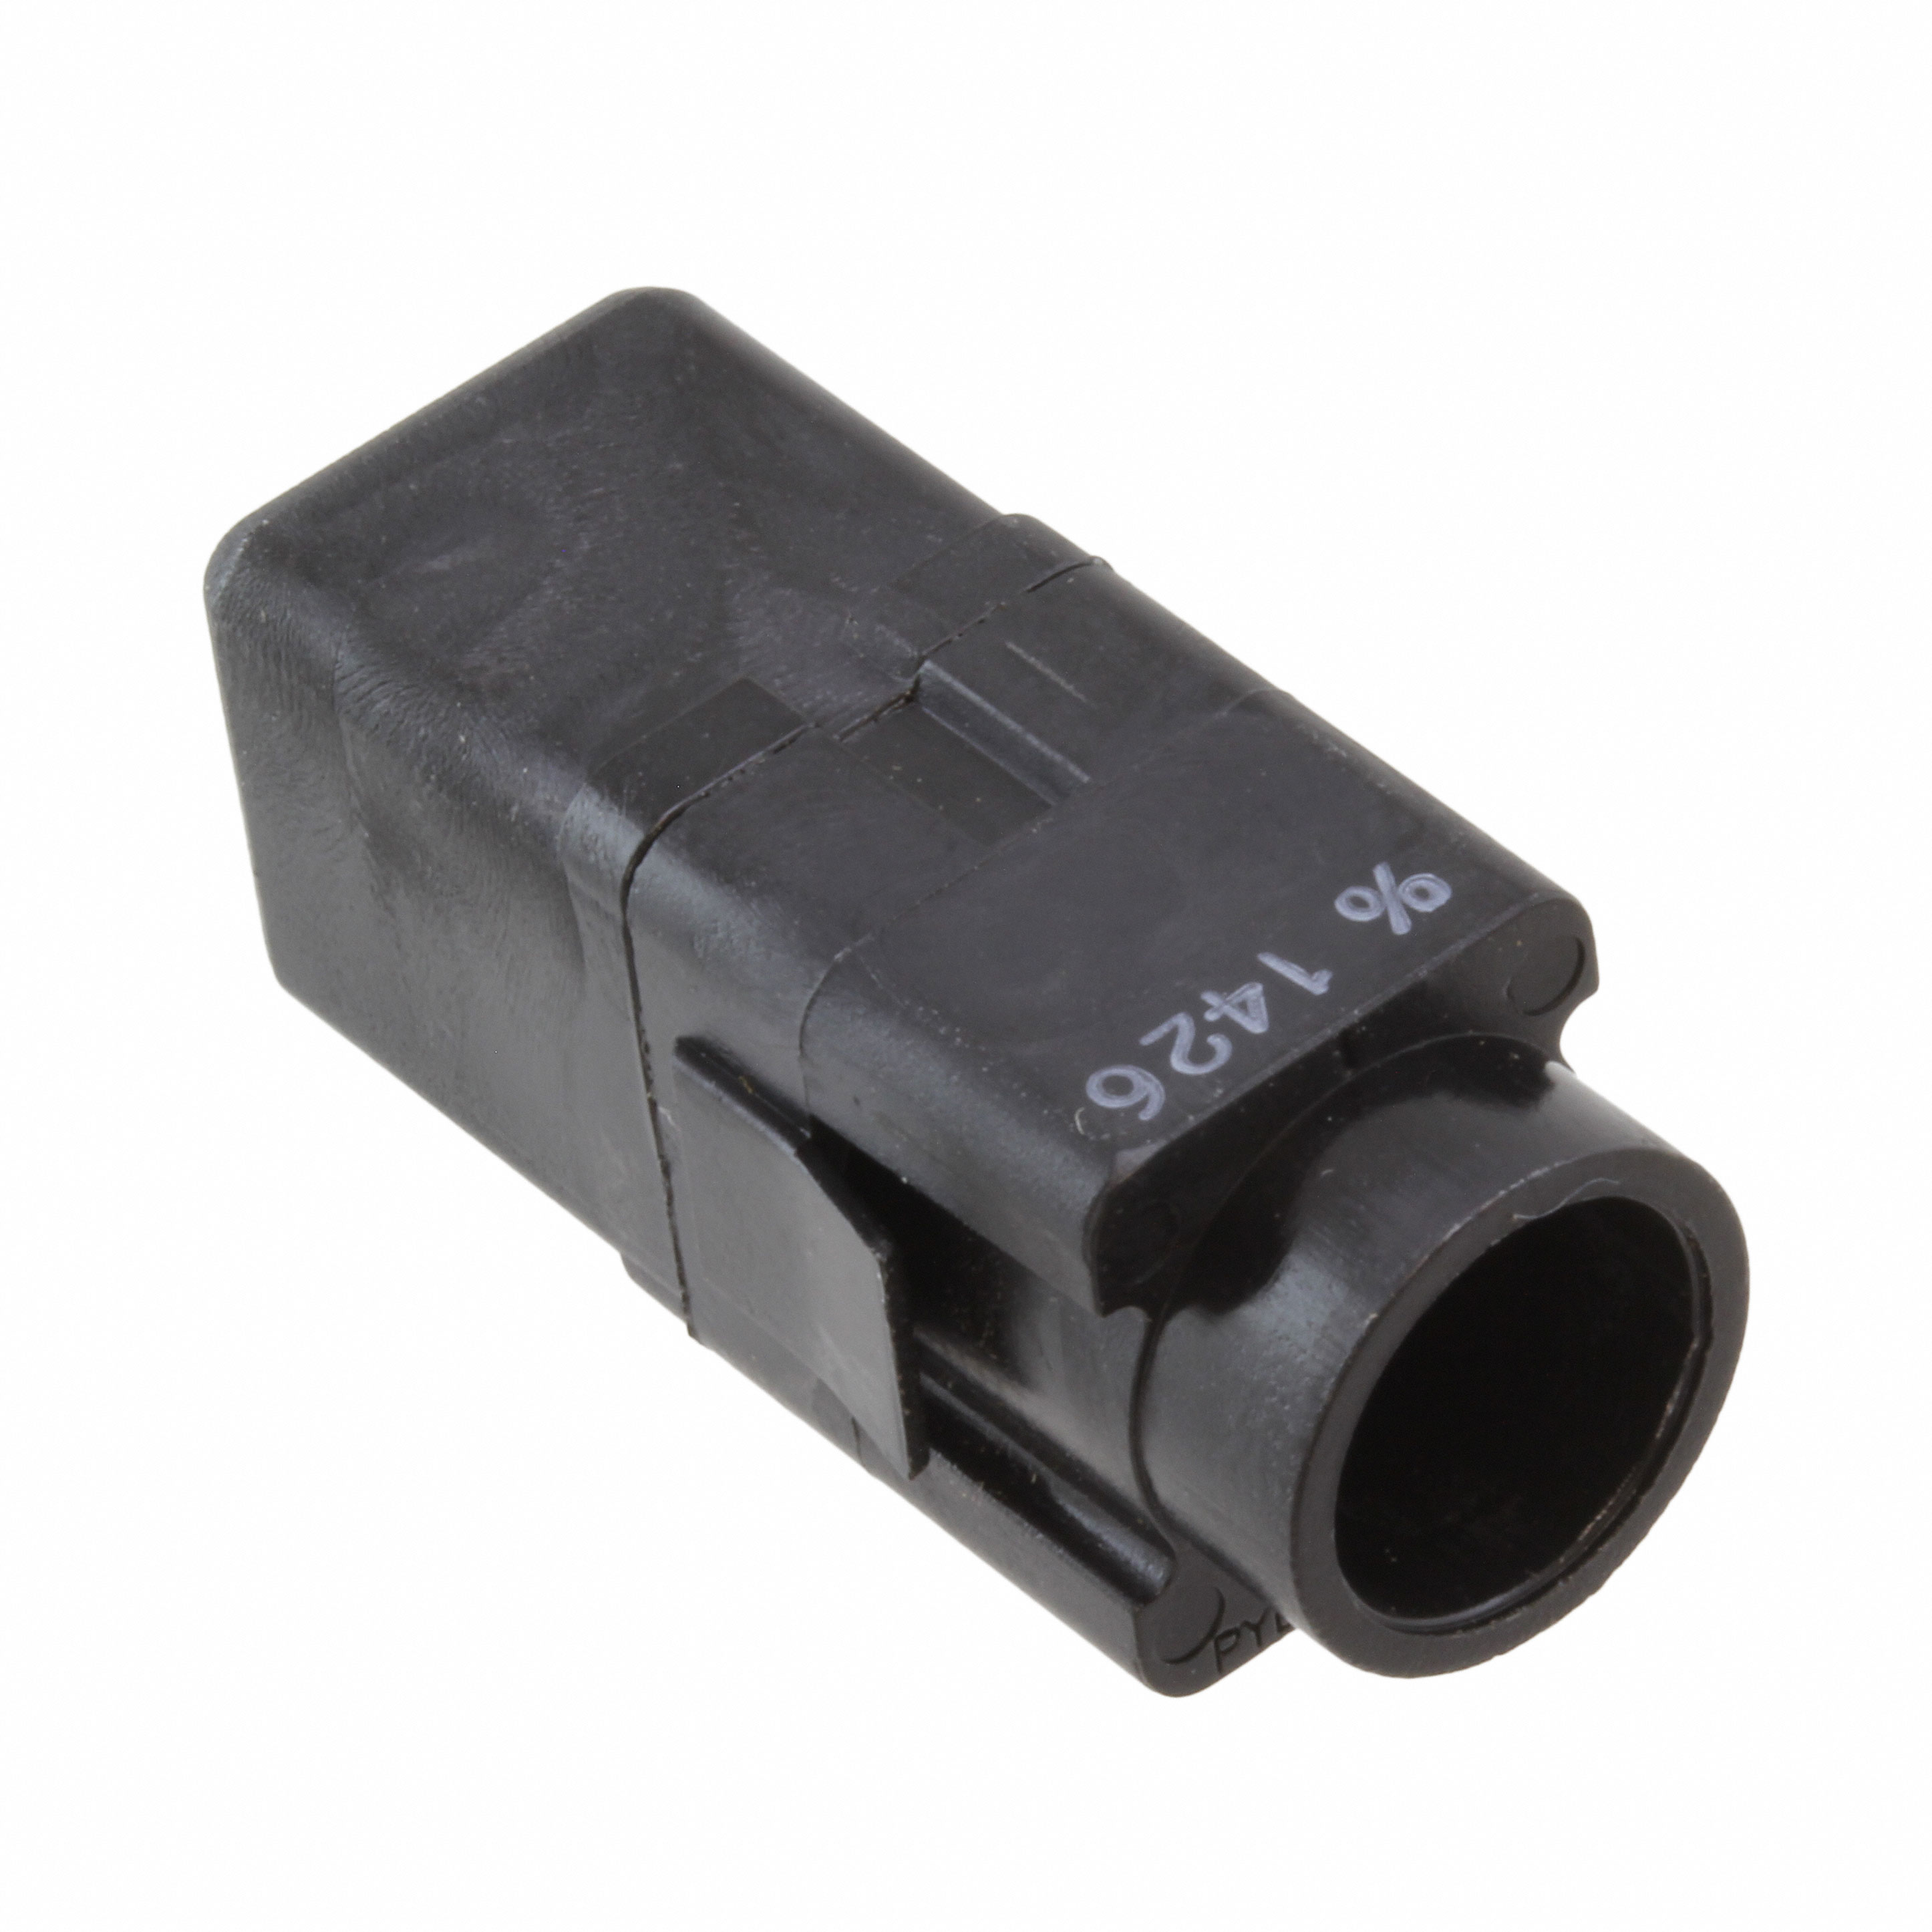 the part number is LMD-3004-S